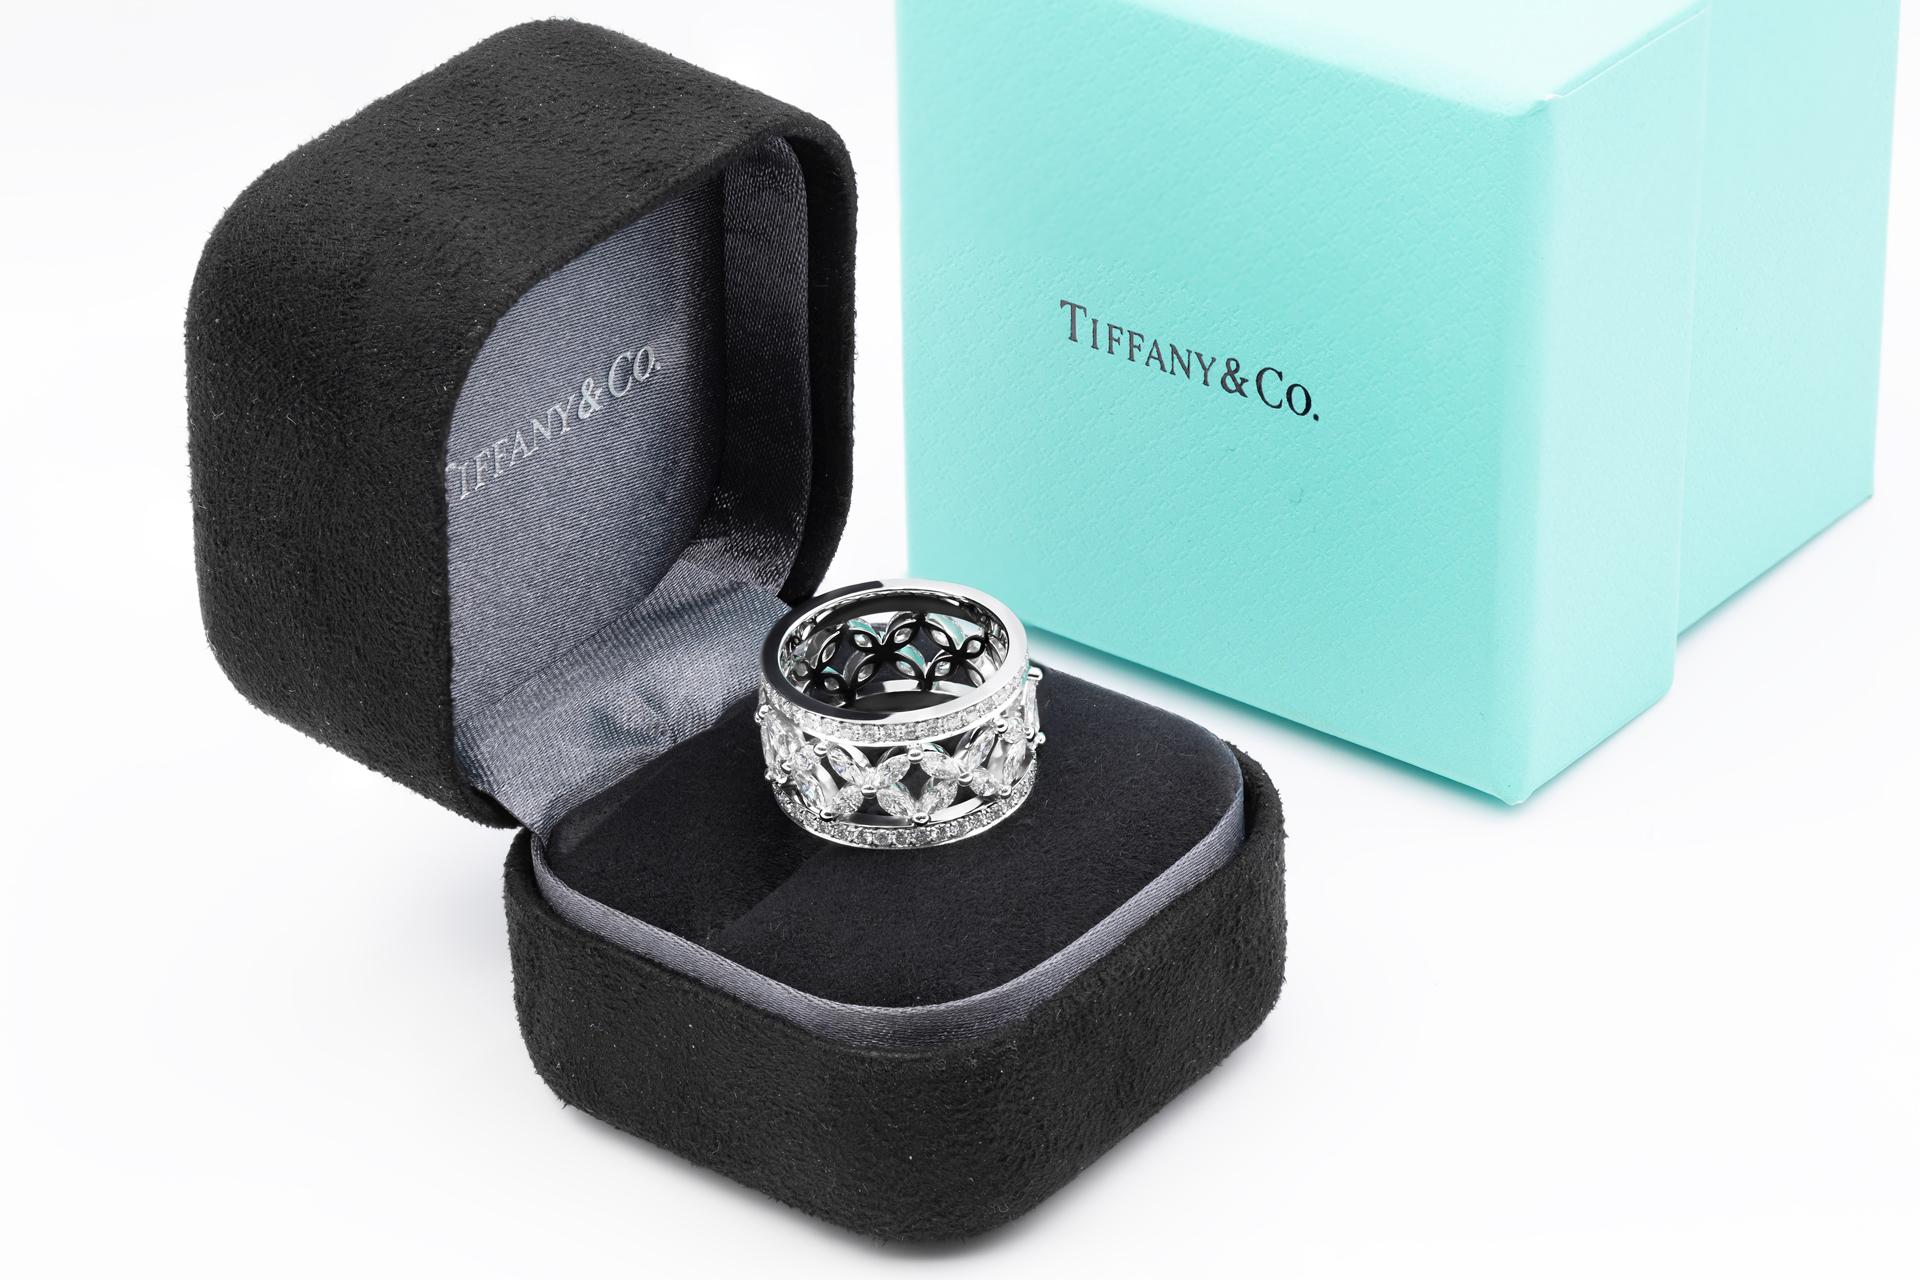 Tiffany & Co. Victoria Band Ring
Platinum with diamonds
Marquise diamonds, carat total weight 2.00
Round brilliant diamonds, carat total weight .34
Size 6.5 (not sizable)
Comes with inner and outer box (appraisal available upon request)
Ring is pe